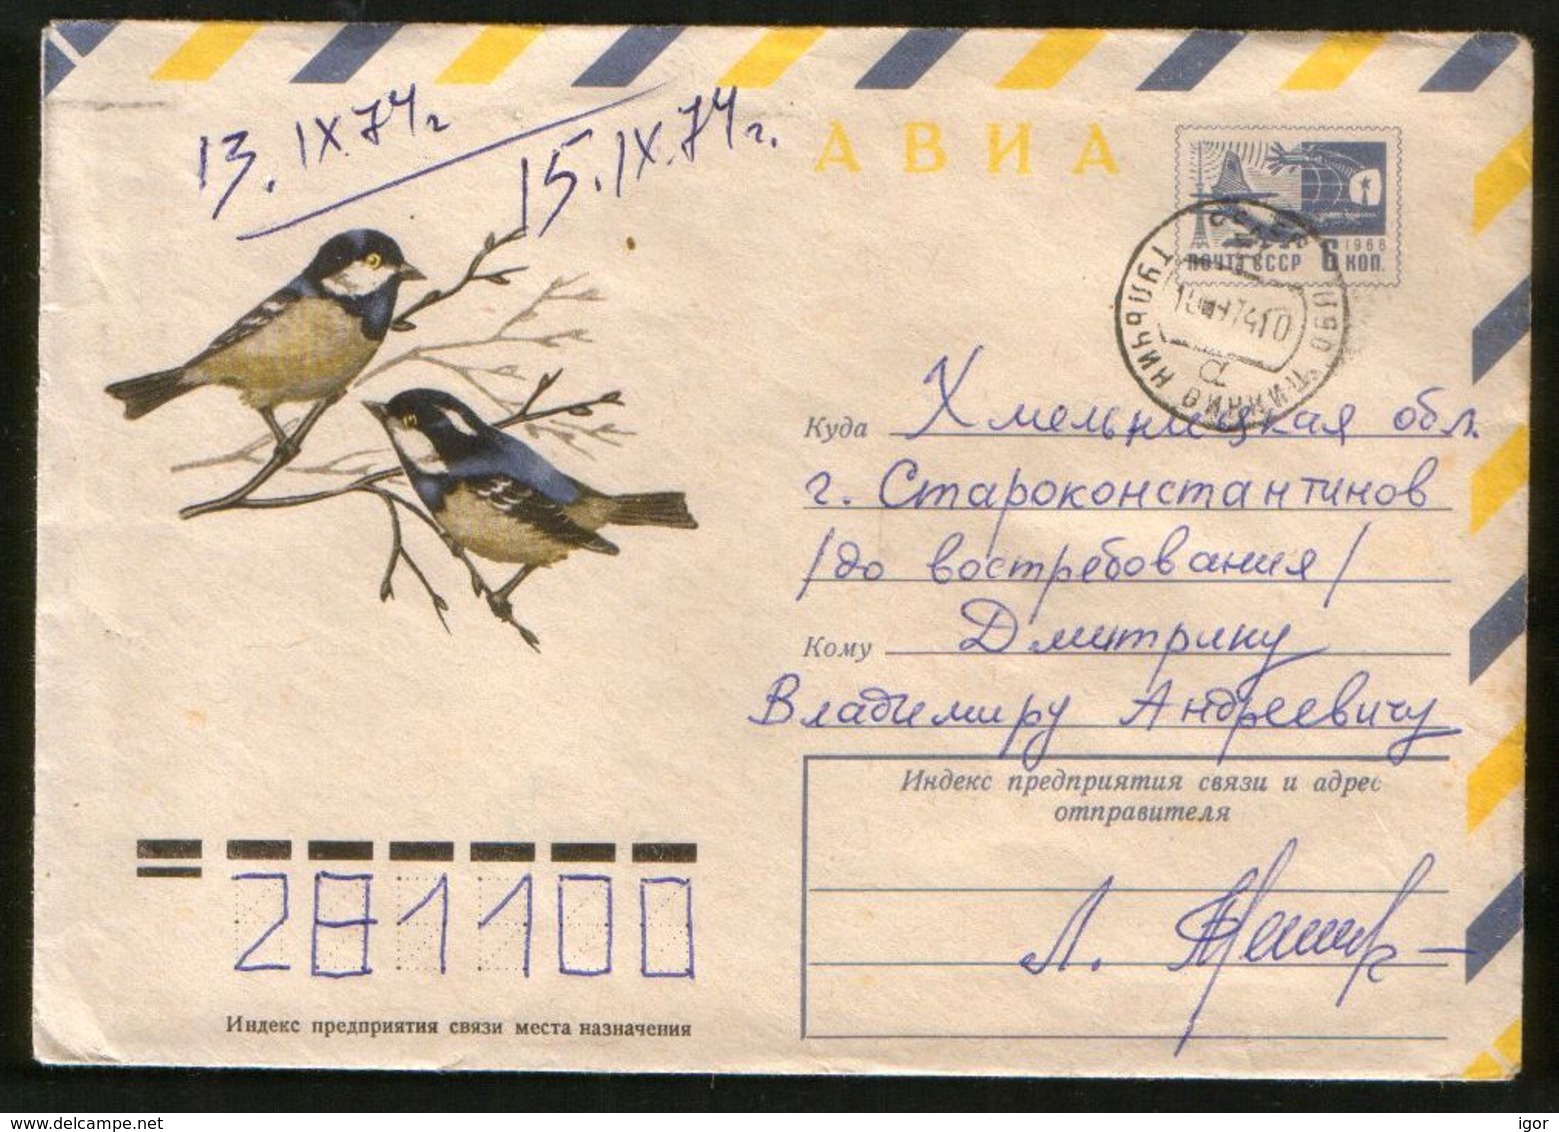 Russia USSR 1974 Air Mail Stationery Cover Fauna, Birds, Black Tit - Sparrows